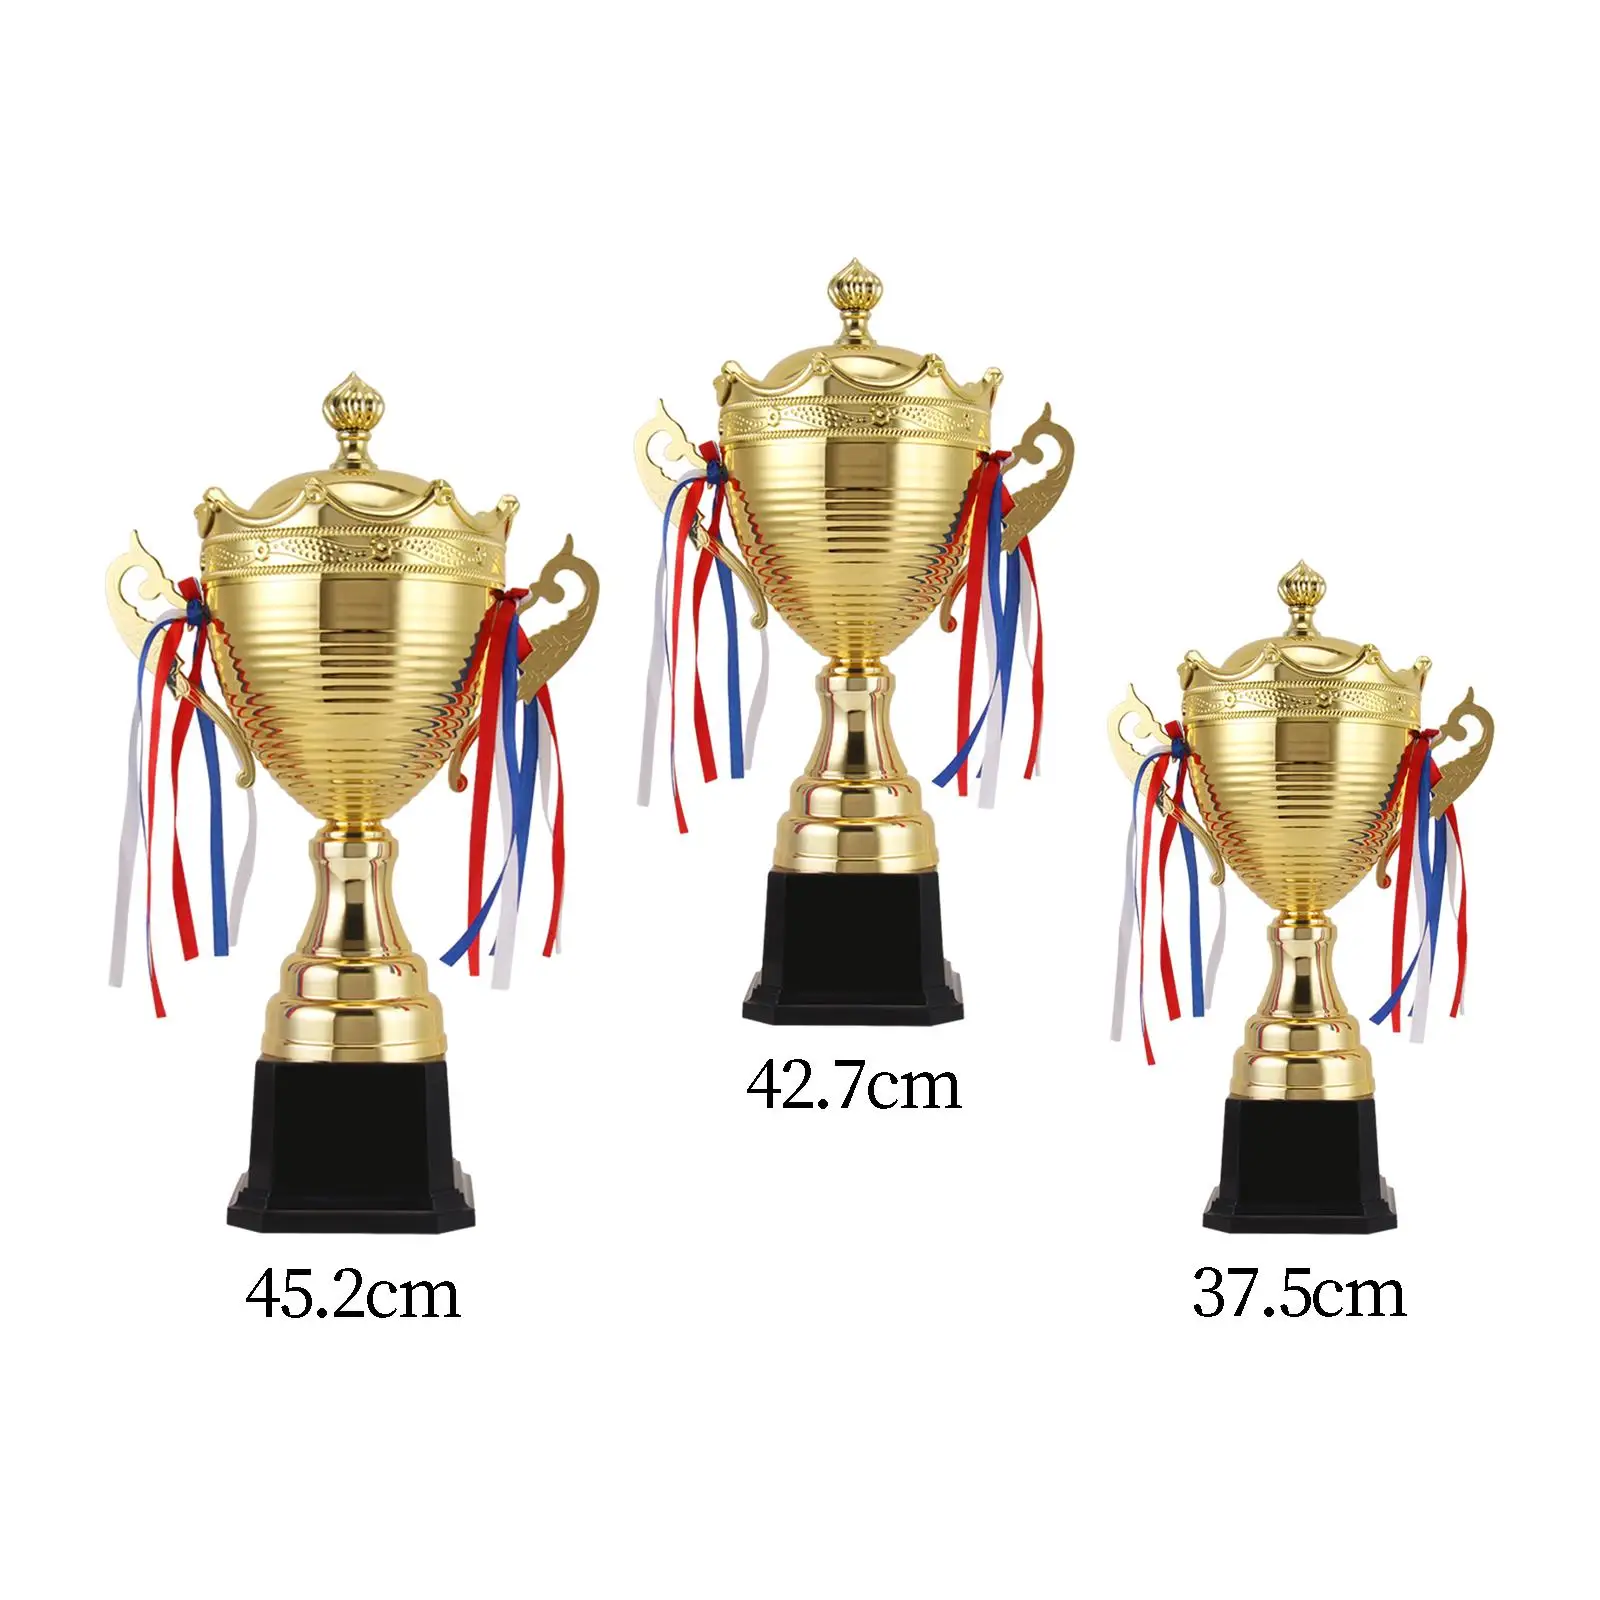 Metal Winner Award Trophies Cup Gold Color Lightweight Decorative Multifunctional Winning Prizes Party Favors for Awards Parties